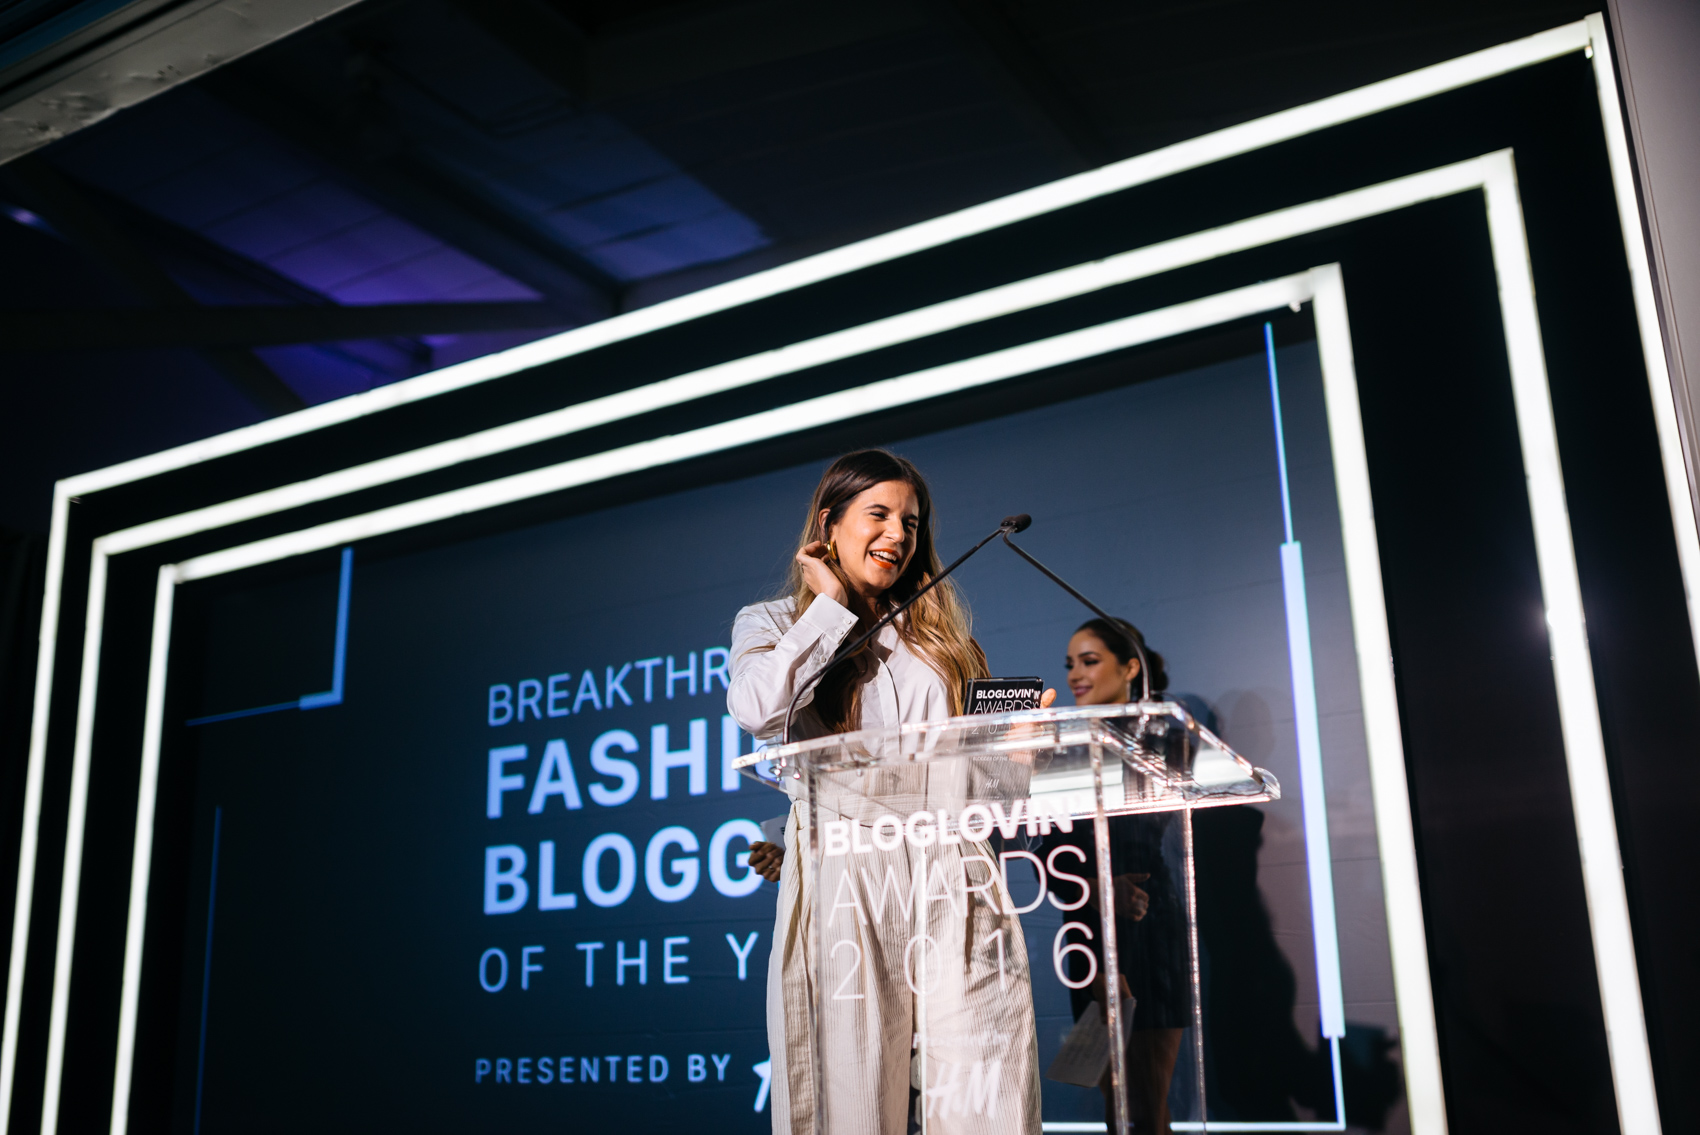 Maristella is the winner of the Breakthrough Fashion Blogger of the Year award at the Bloglovin Awards 2016